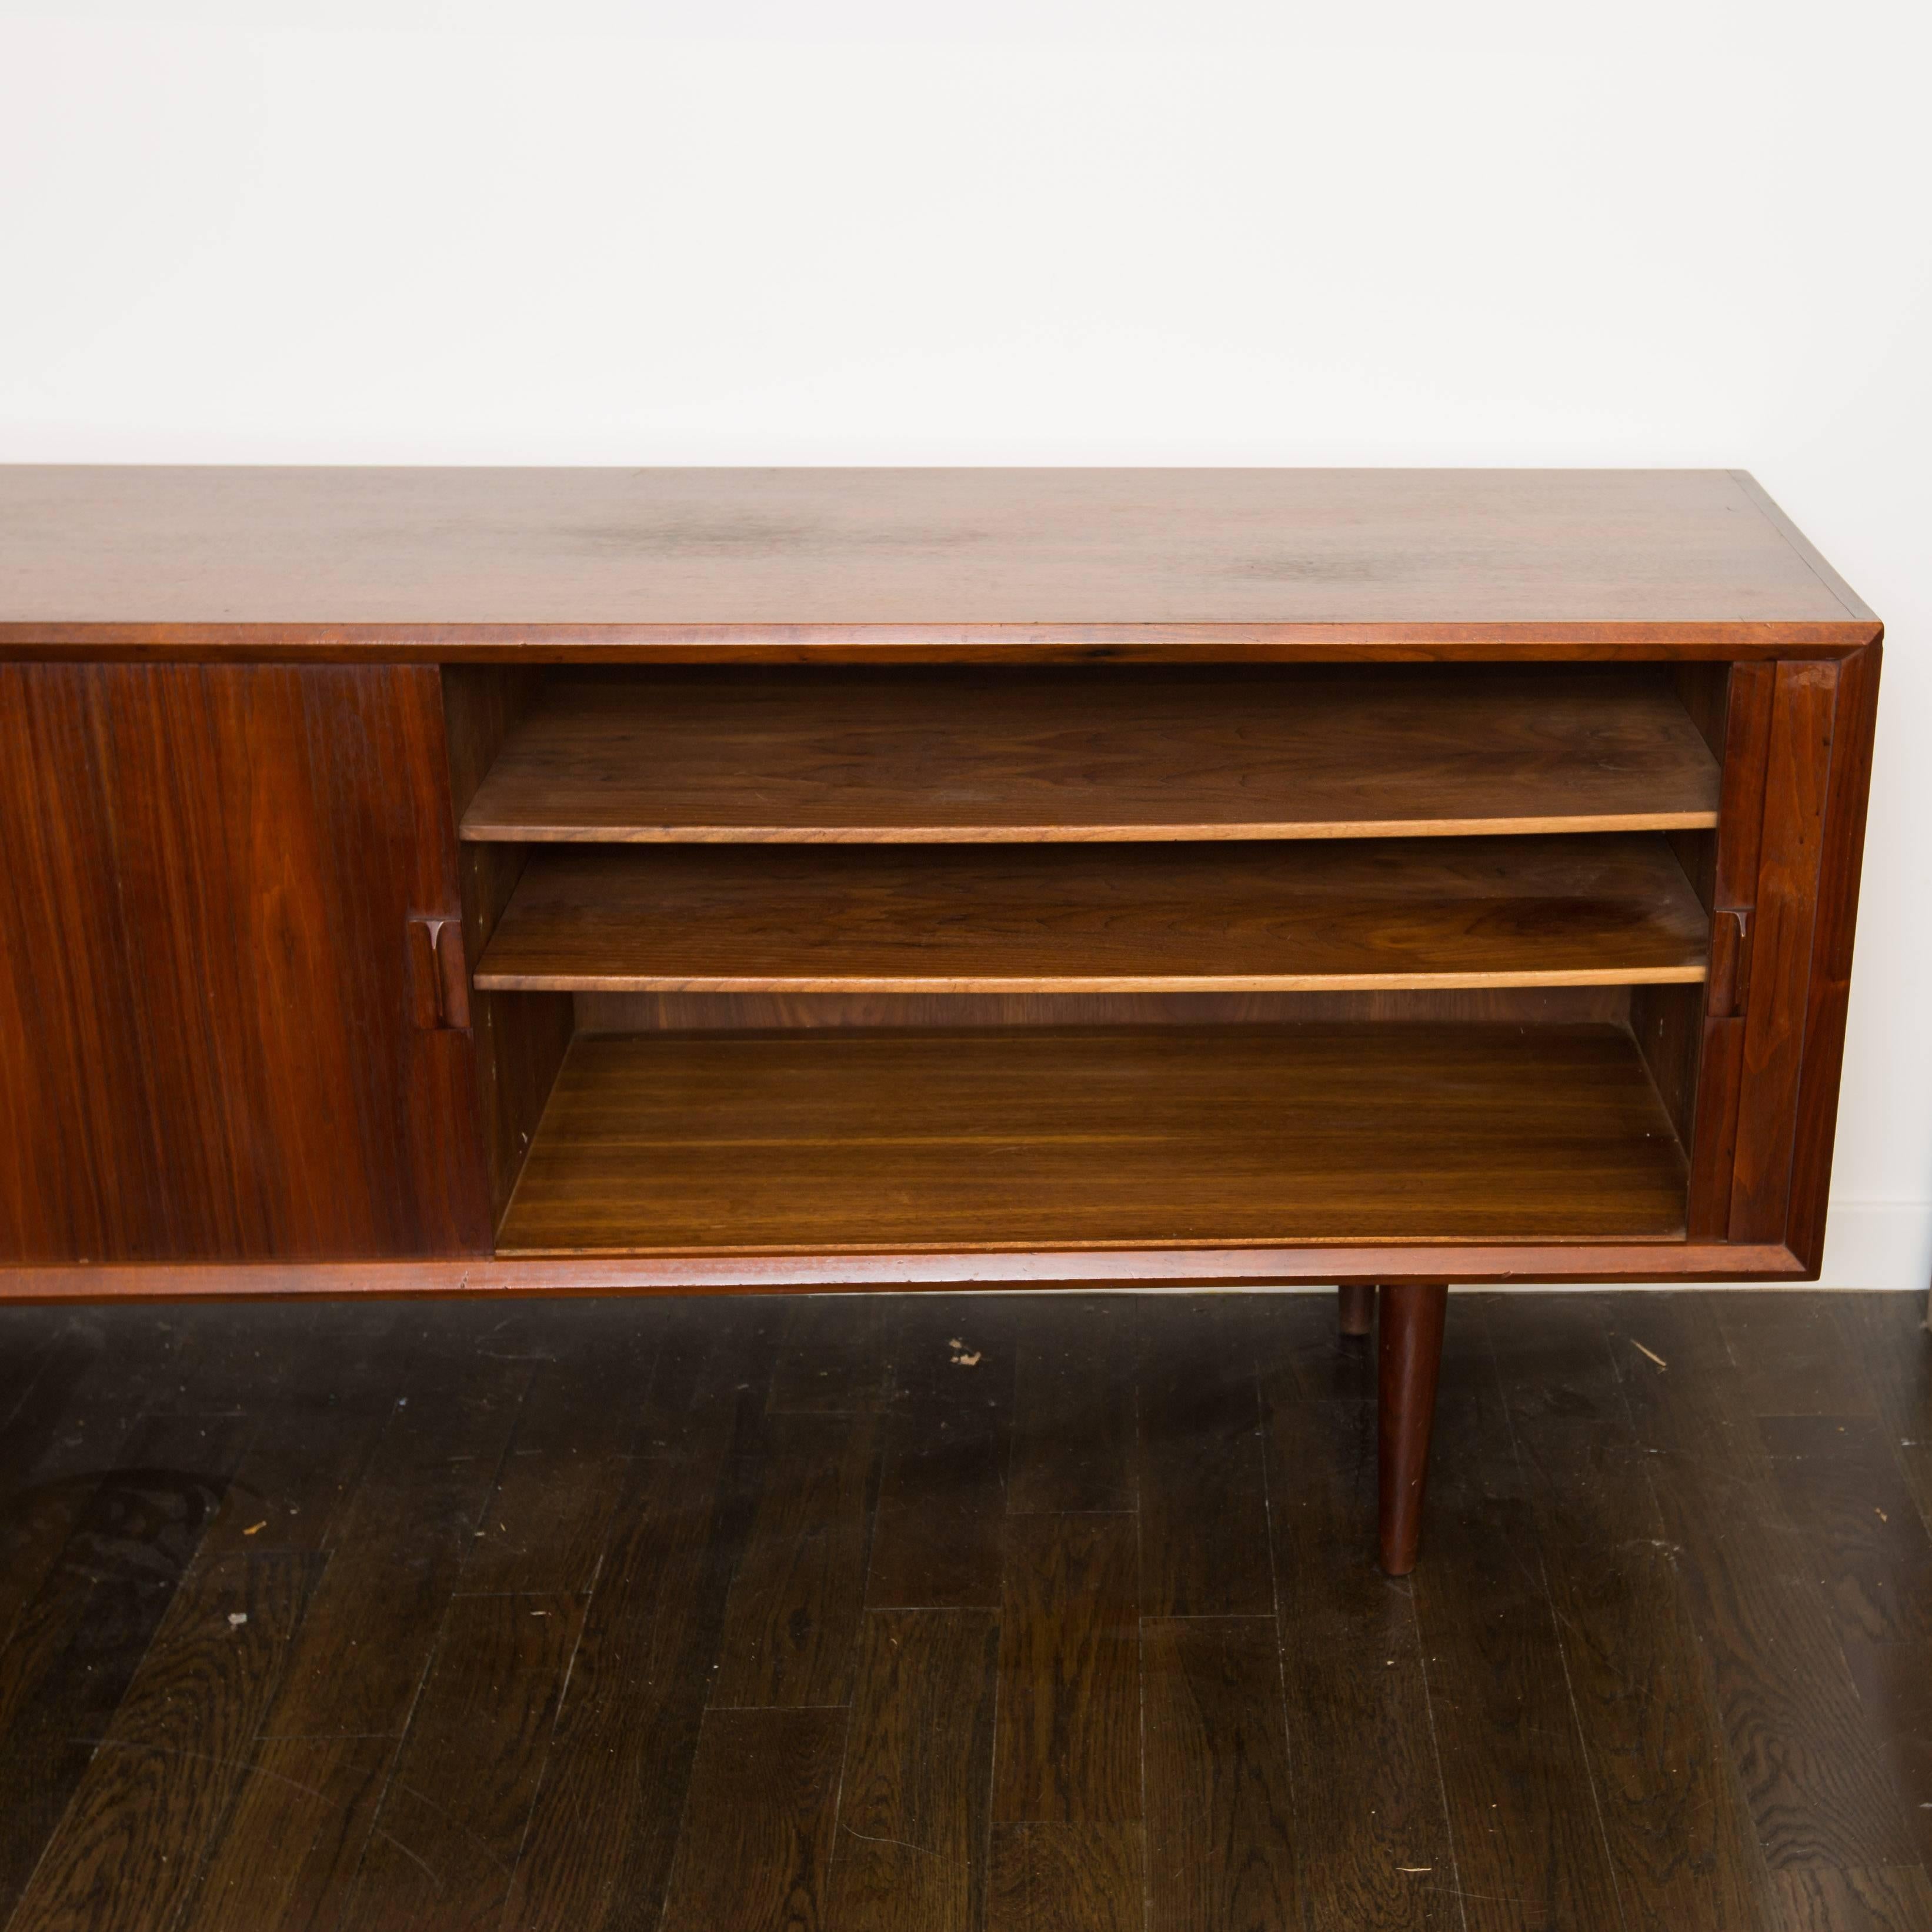 Extra long credenza in walnut with spectacular tambour doors that reveal plenty of storage.